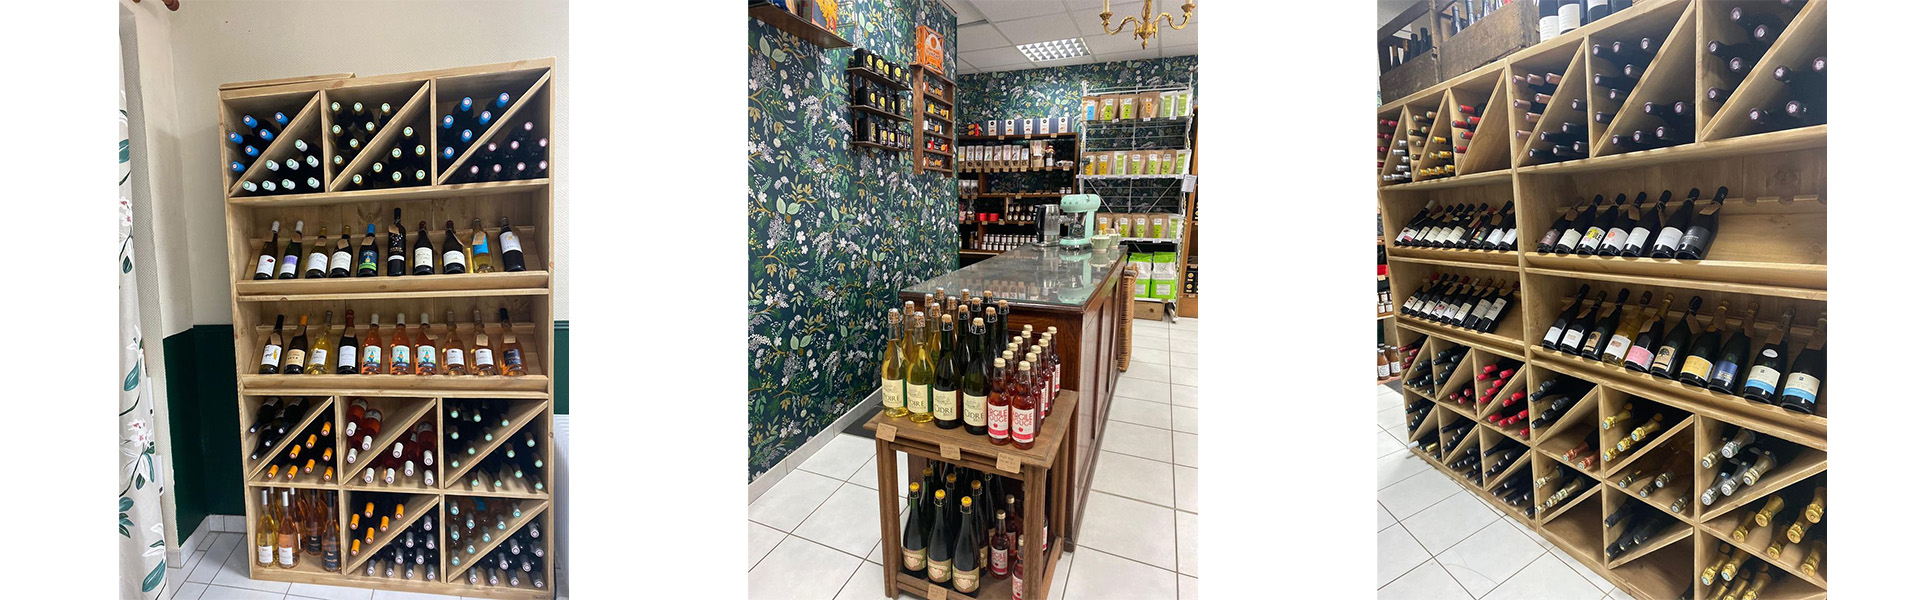 layout grocery wine shop